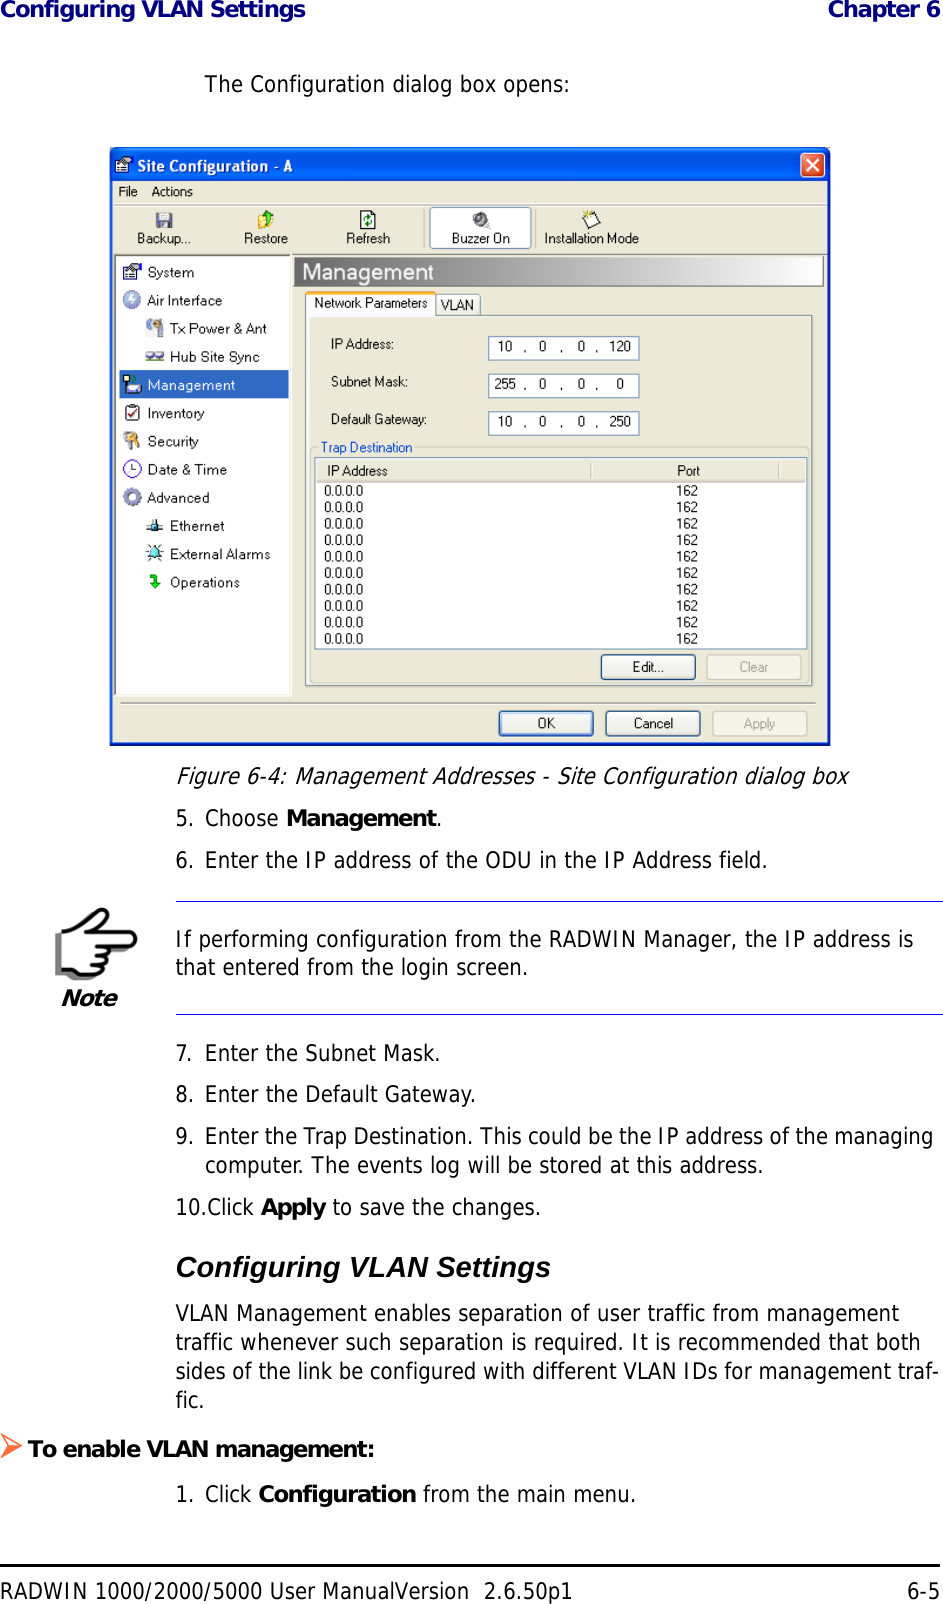 Configuring VLAN Settings  Chapter 6RADWIN 1000/2000/5000 User ManualVersion  2.6.50p1 6-5The Configuration dialog box opens:Figure 6-4: Management Addresses - Site Configuration dialog box5. Choose Management.6. Enter the IP address of the ODU in the IP Address field.7. Enter the Subnet Mask.8. Enter the Default Gateway.9. Enter the Trap Destination. This could be the IP address of the managing computer. The events log will be stored at this address.10.Click Apply to save the changes.Configuring VLAN SettingsVLAN Management enables separation of user traffic from management traffic whenever such separation is required. It is recommended that both sides of the link be configured with different VLAN IDs for management traf-fic.To enable VLAN management:1. Click Configuration from the main menu.NoteIf performing configuration from the RADWIN Manager, the IP address is that entered from the login screen.